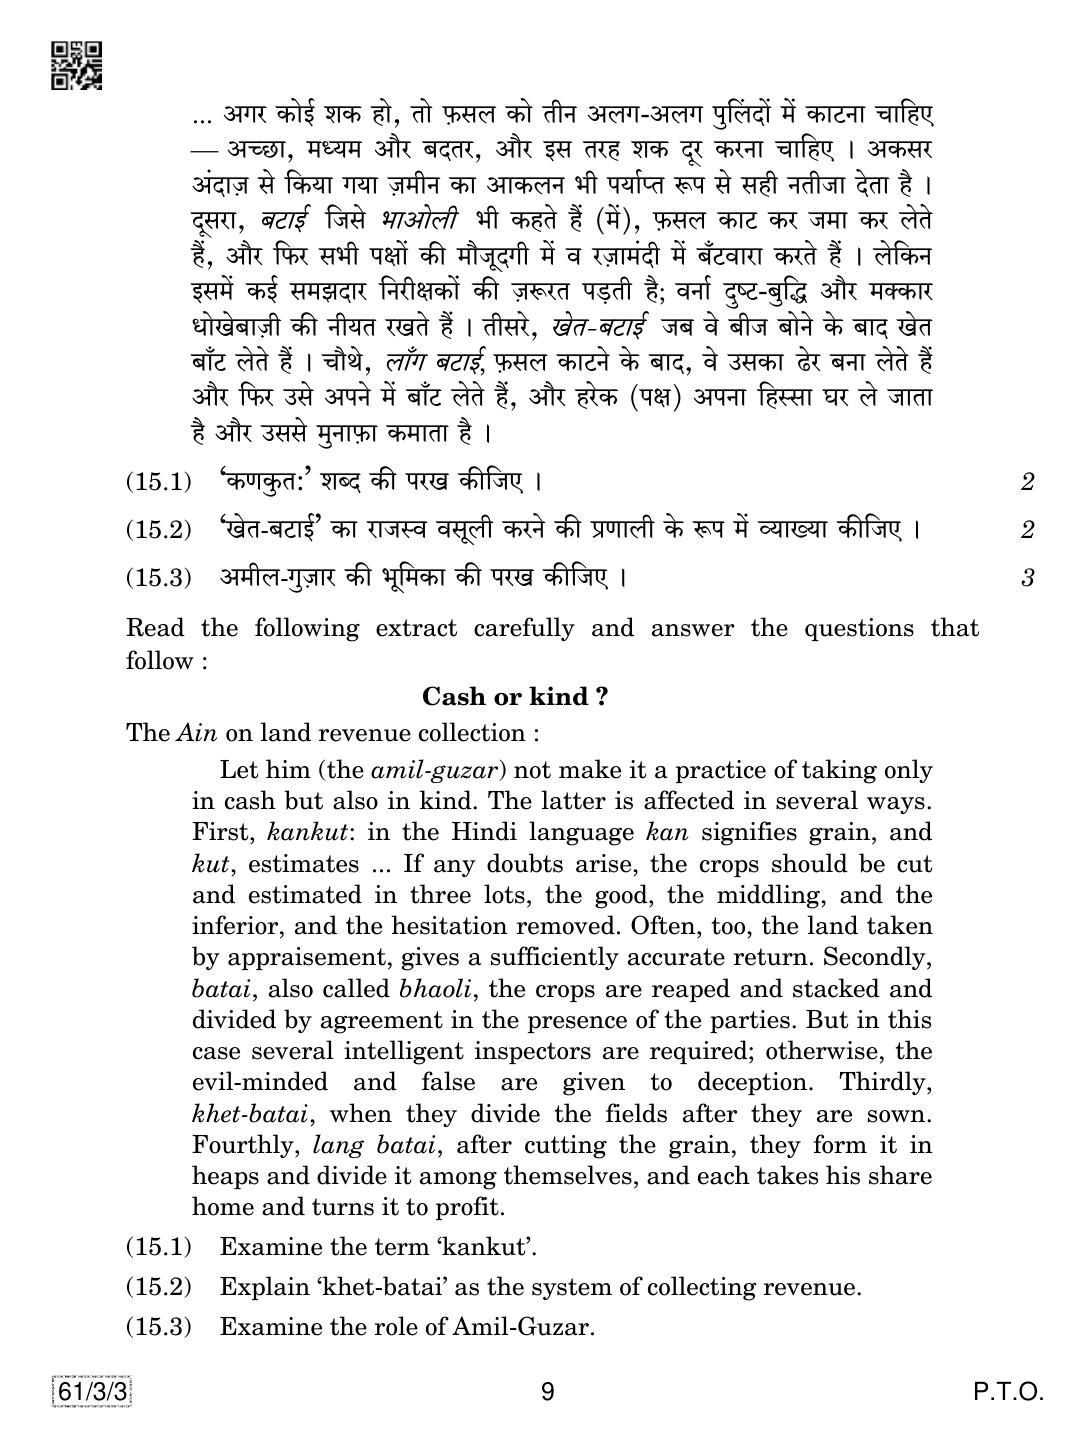 CBSE Class 12 61-3-3 History 2019 Question Paper - Page 9